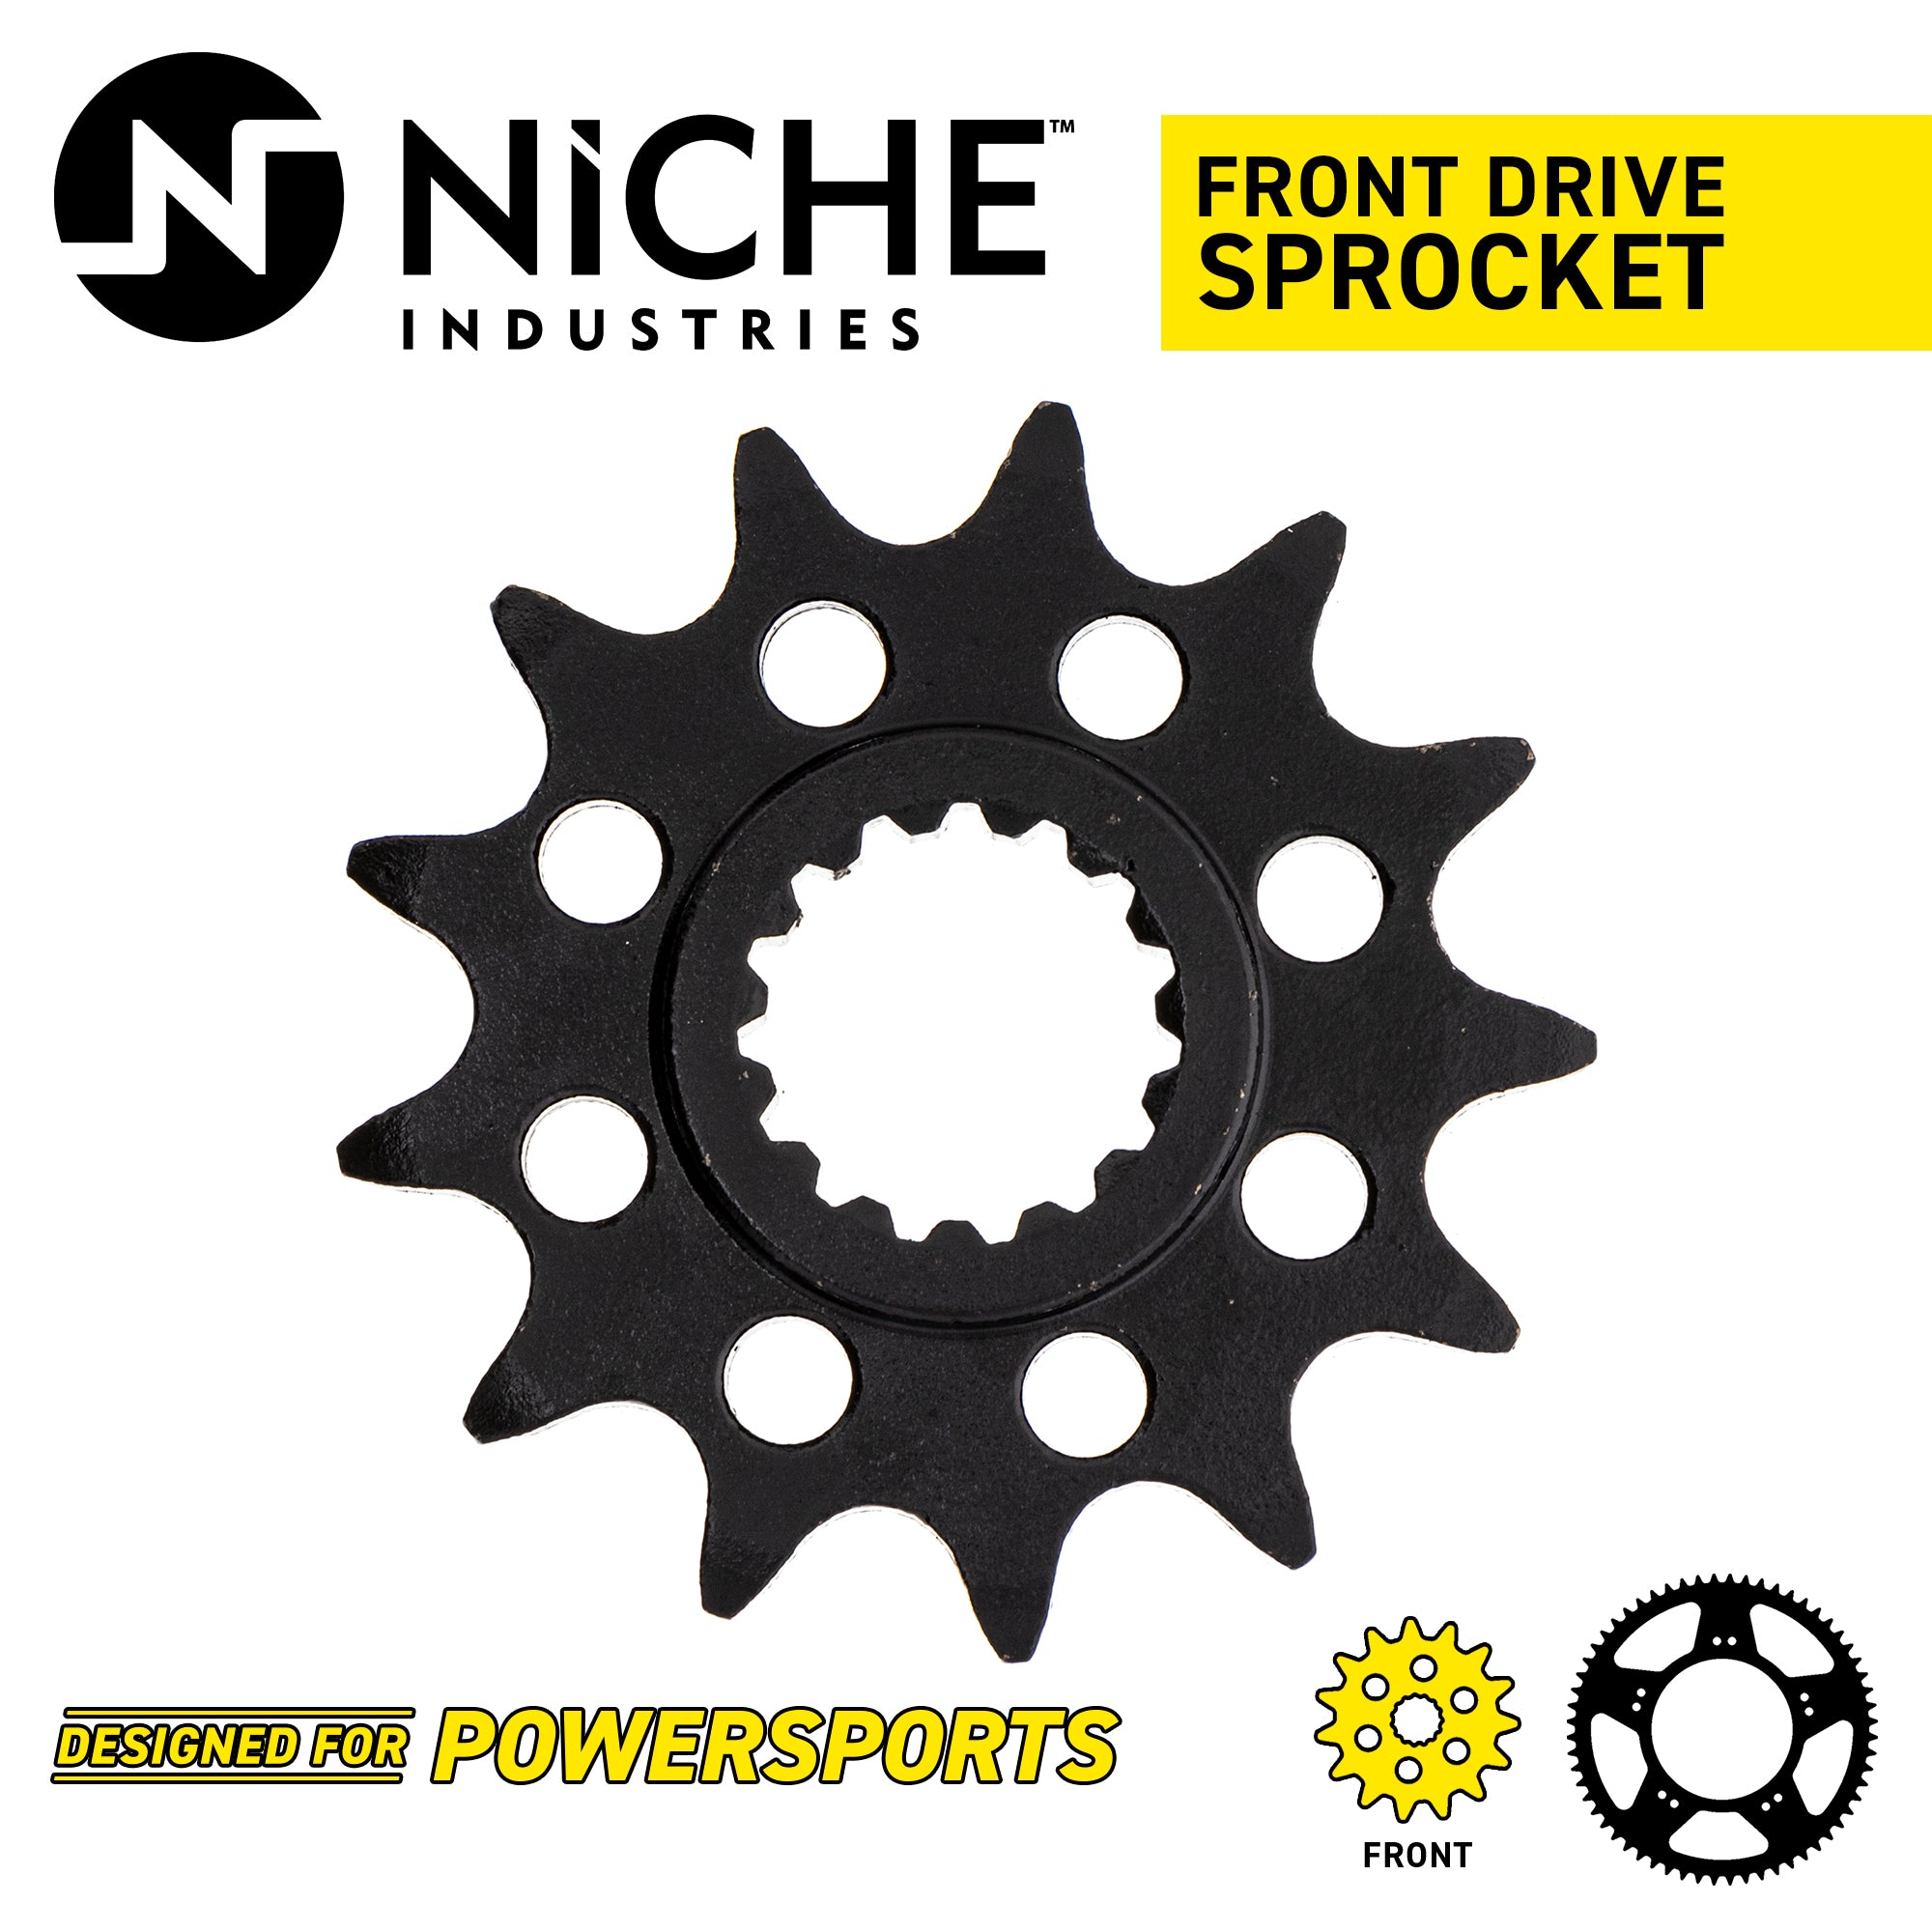 Drive Sprockets & Chain Kit For BETA MK1003596